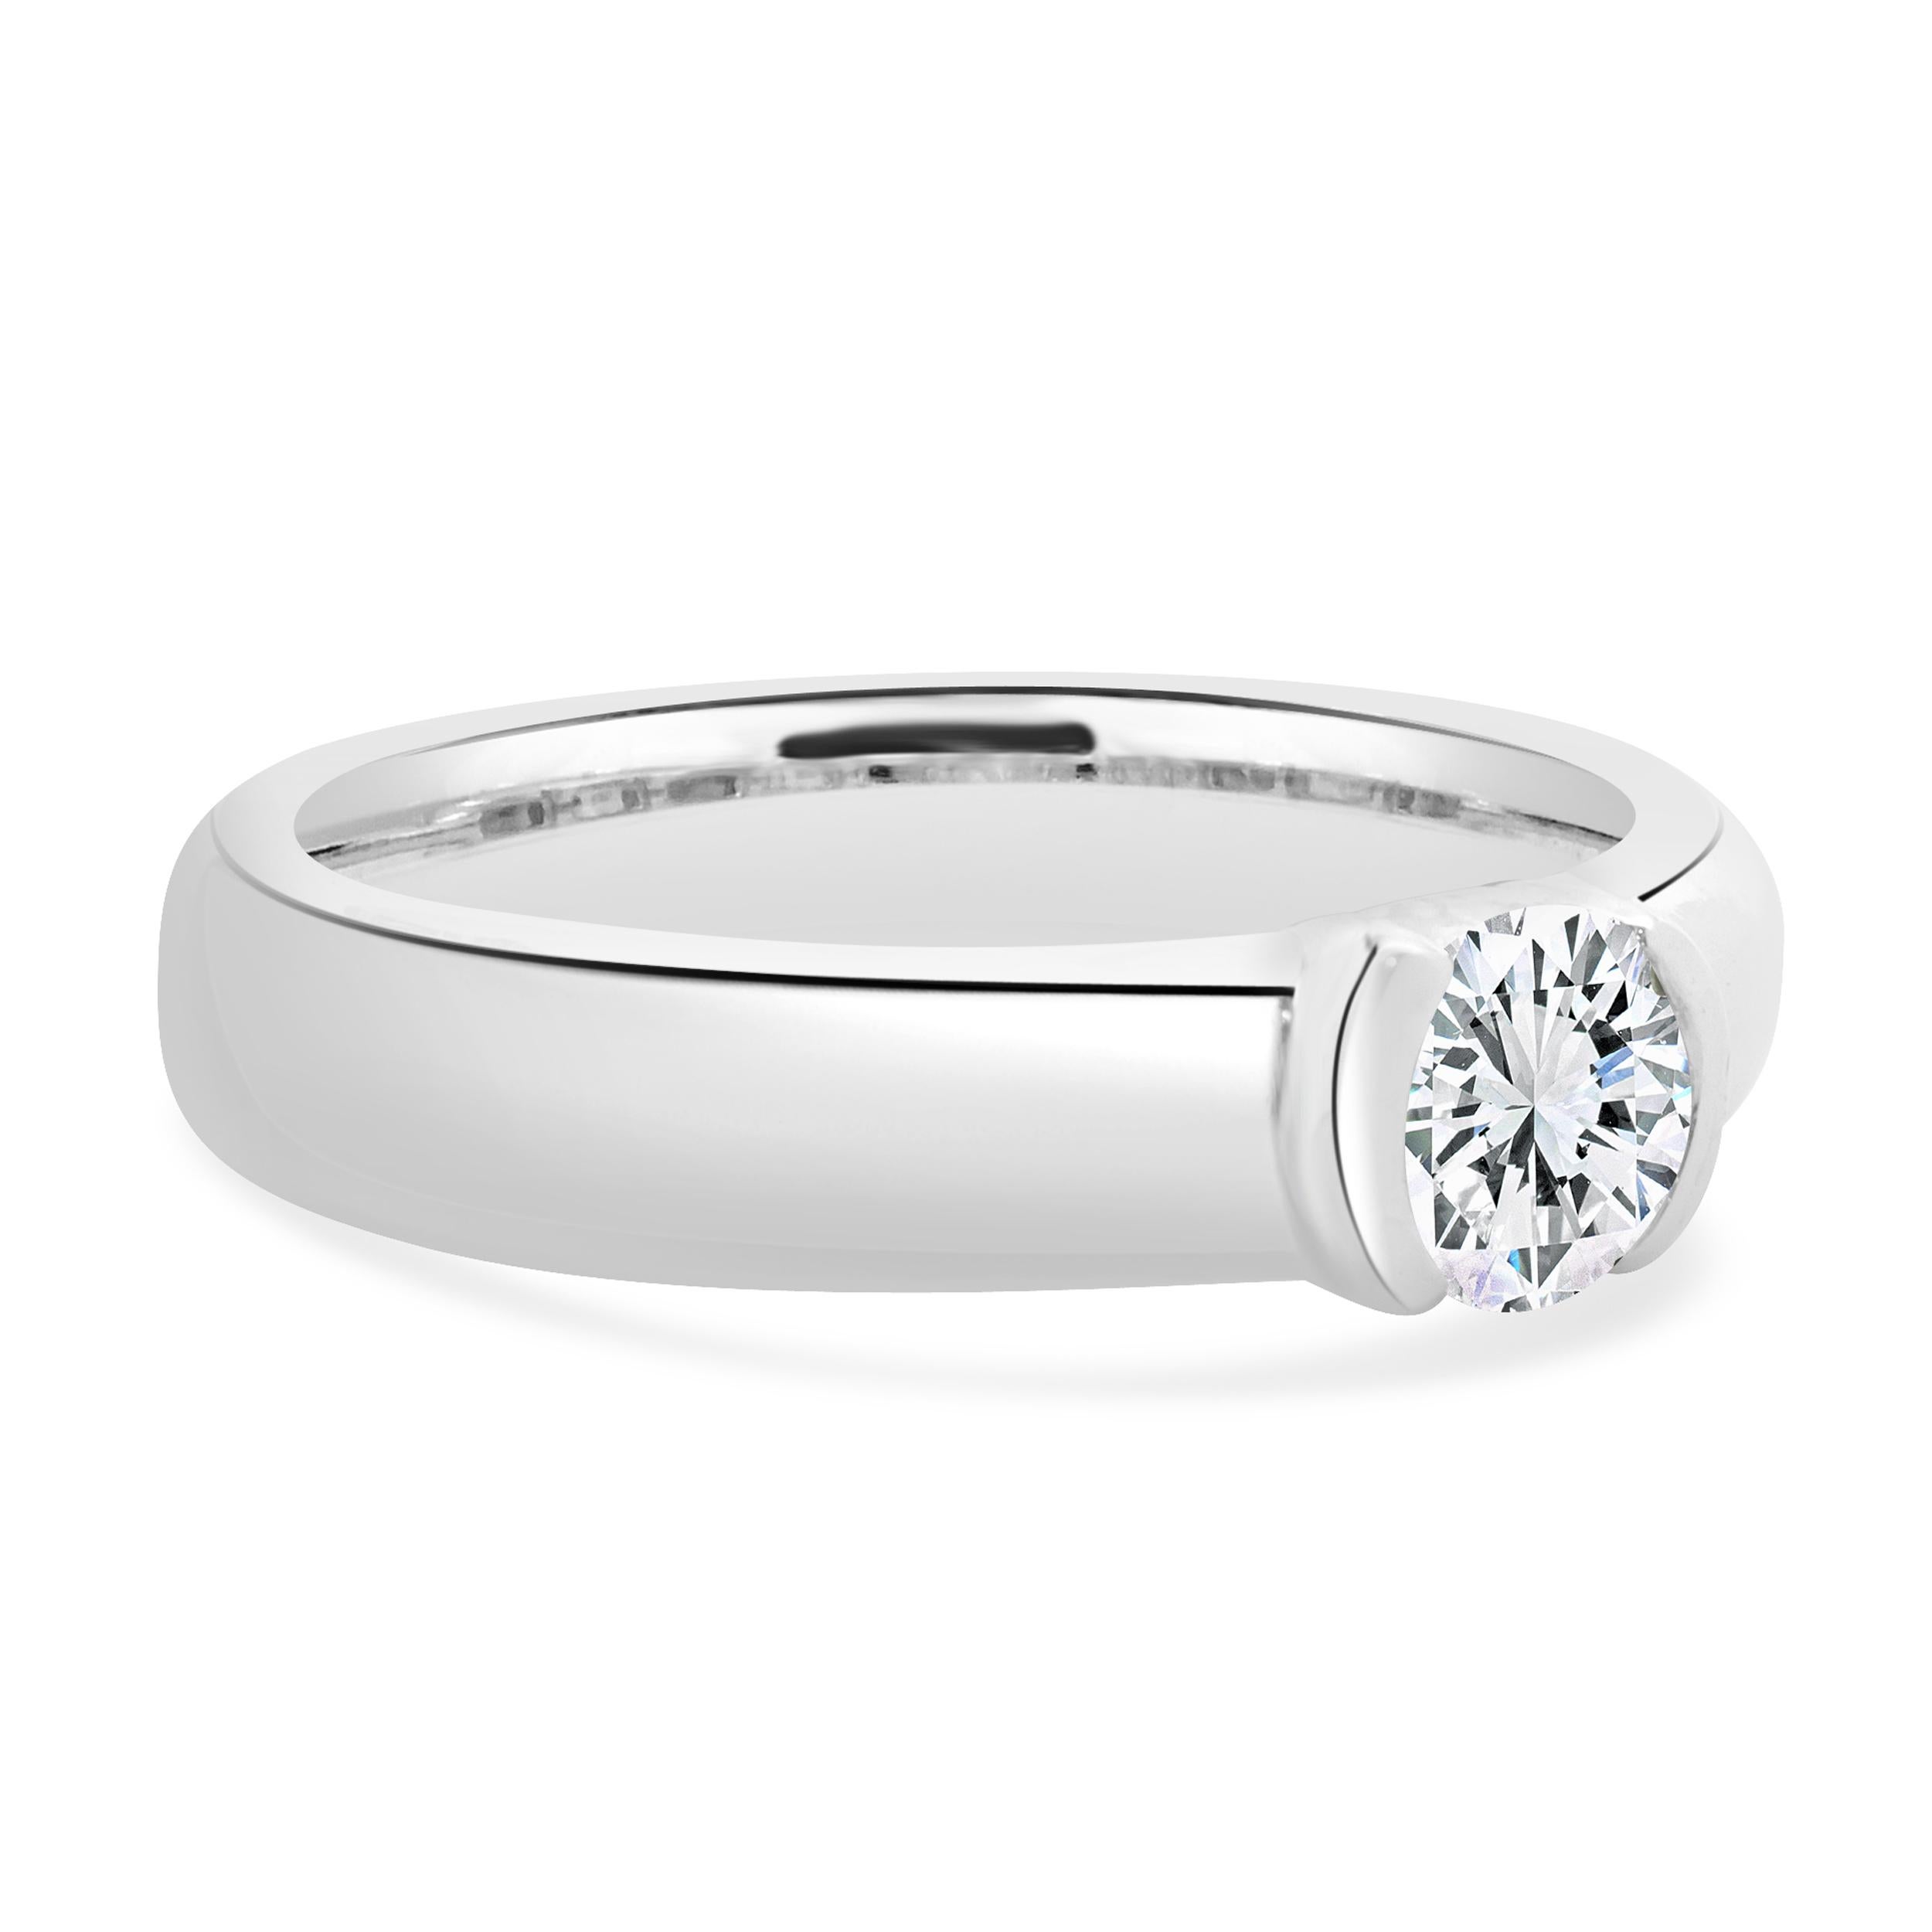 Designer: Tiffany & Co. 
Material: platinum
Diamond: 1 round brilliant cut = 0.38ct
Color: I
Clarity: VS1
Dimensions: ring top measures 4mm wide
Size: 4.5 (sizing available)
Weight: 7.53 grams

Complete with original Tiffany & Co. certificate
